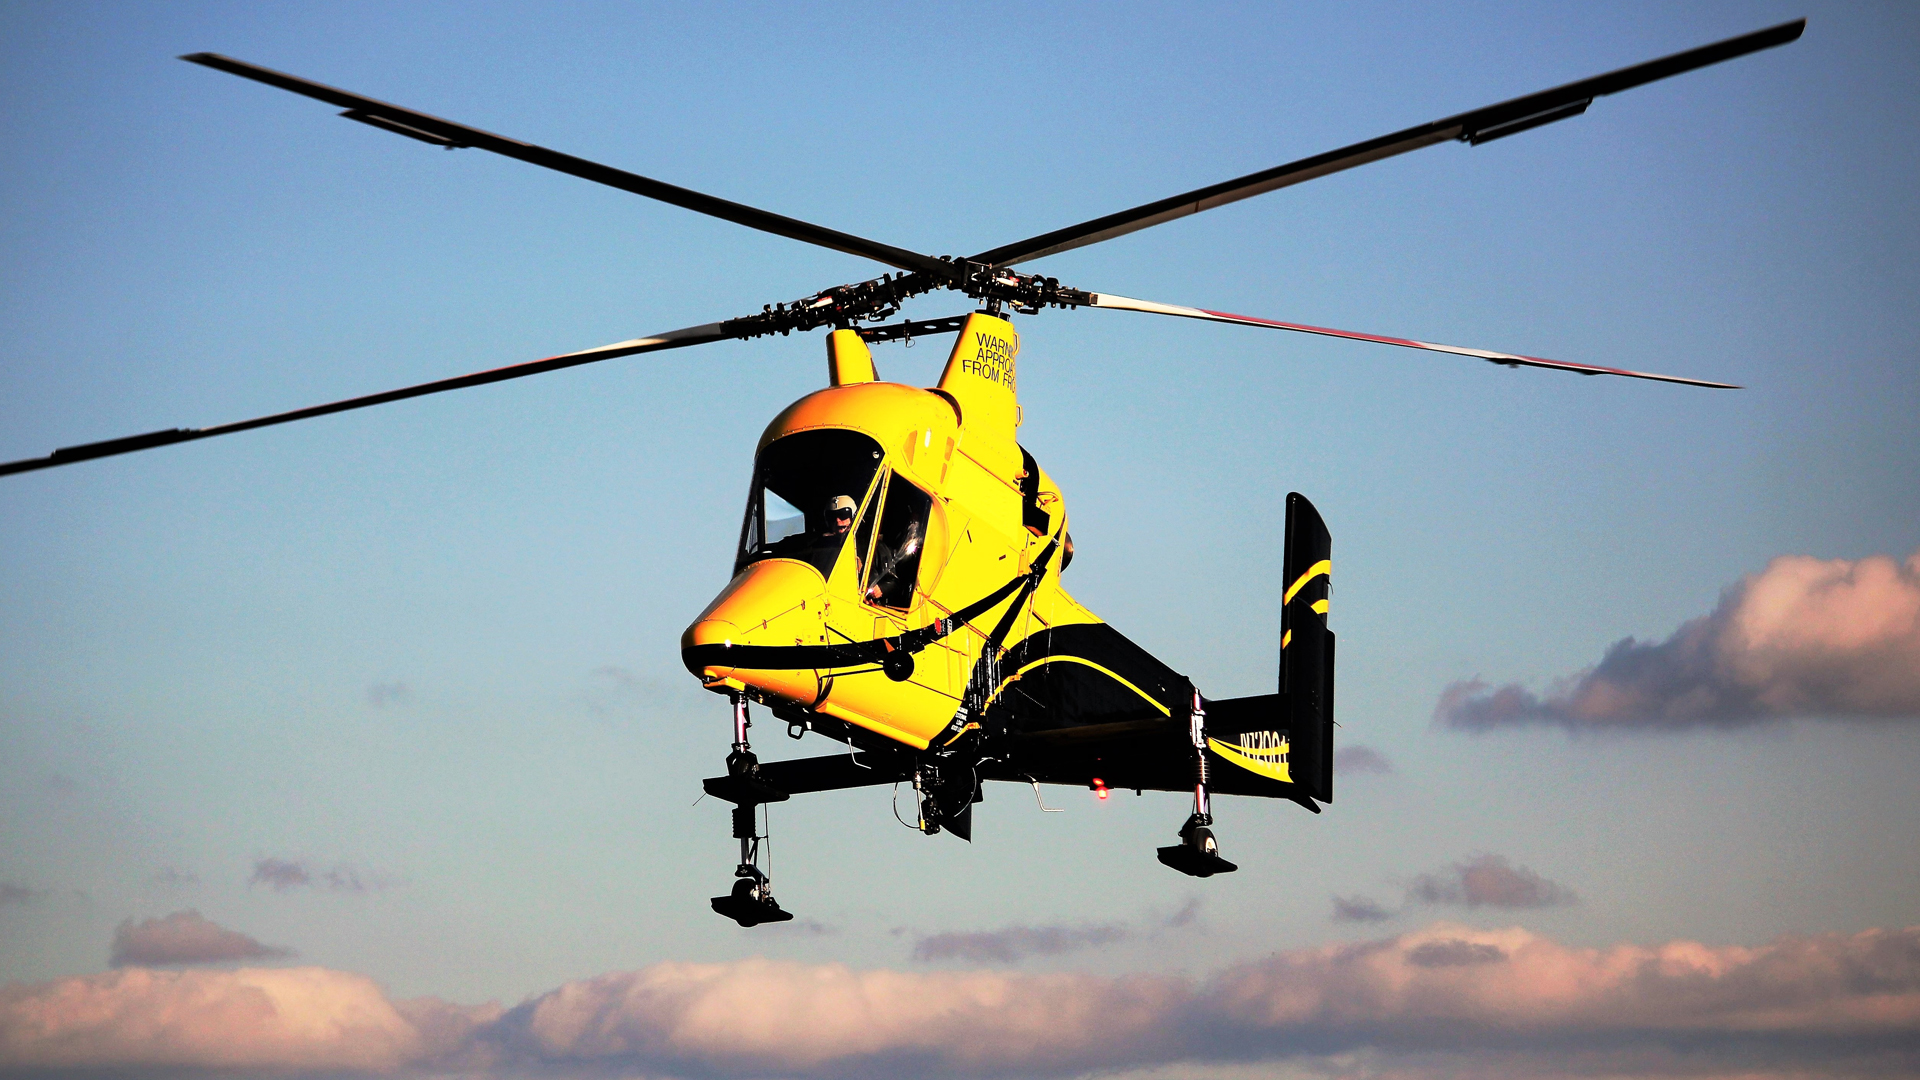 Kaman to Deliver K-MAX to Helicopter Express in 2019